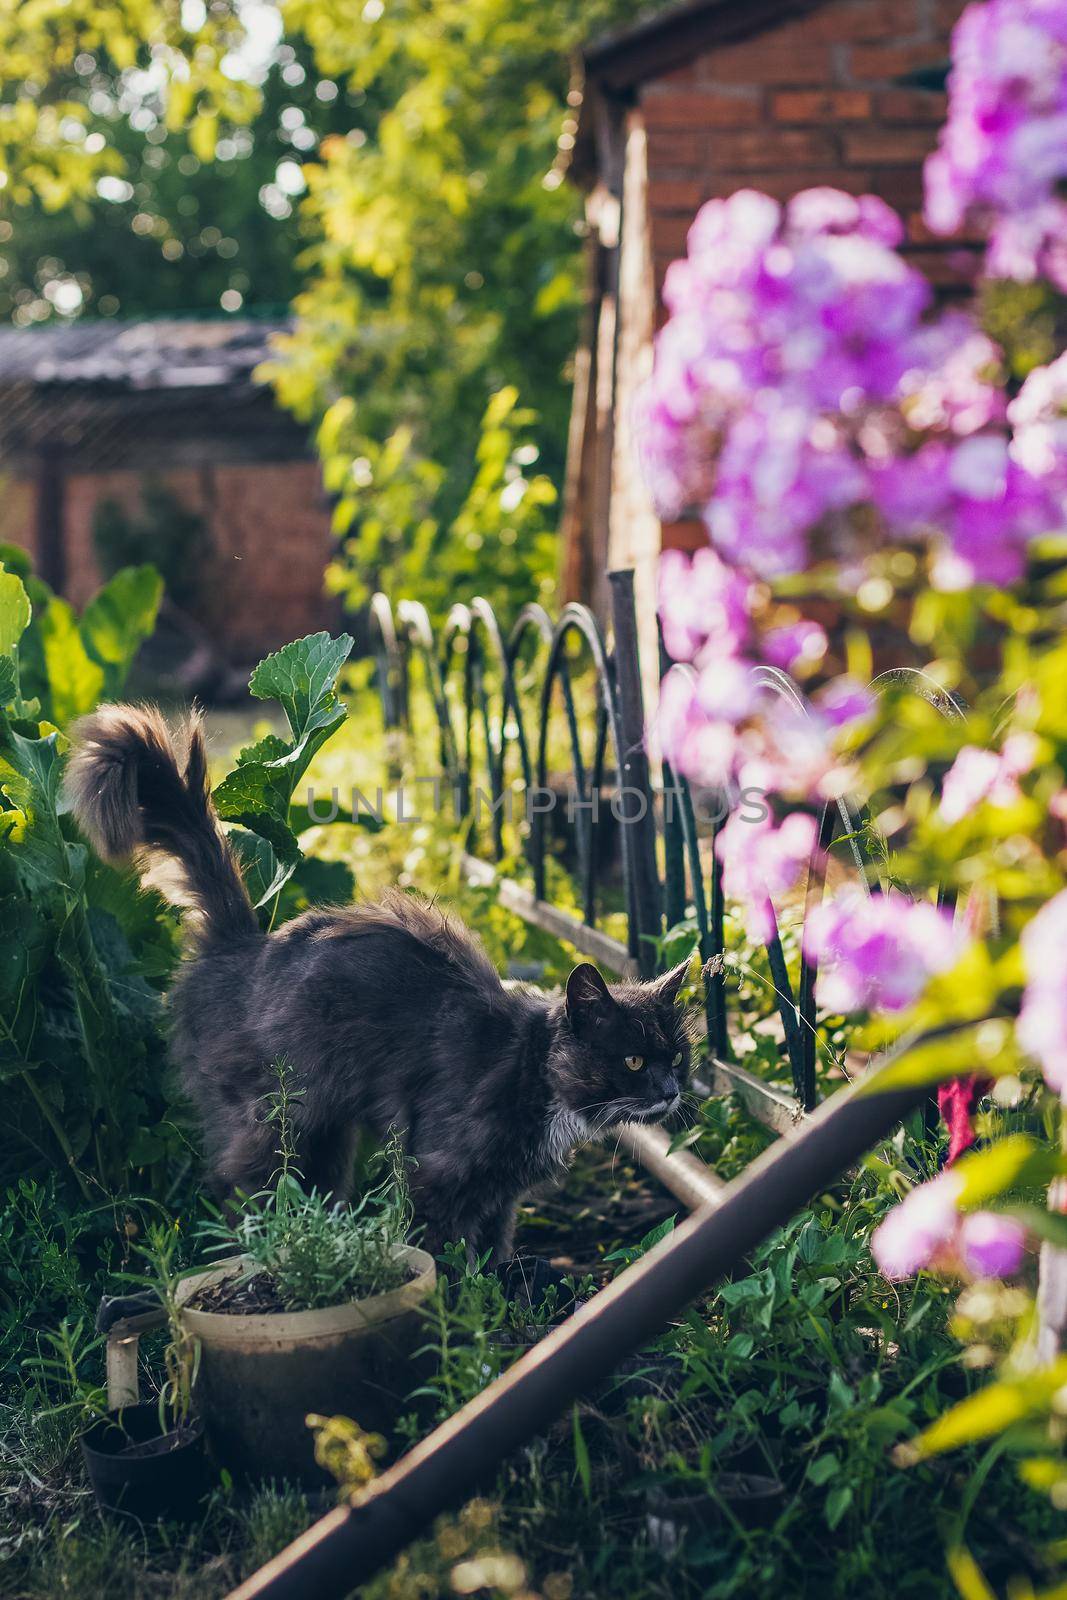 Summer background with a grey cat walking in the garden and flowers by mmp1206